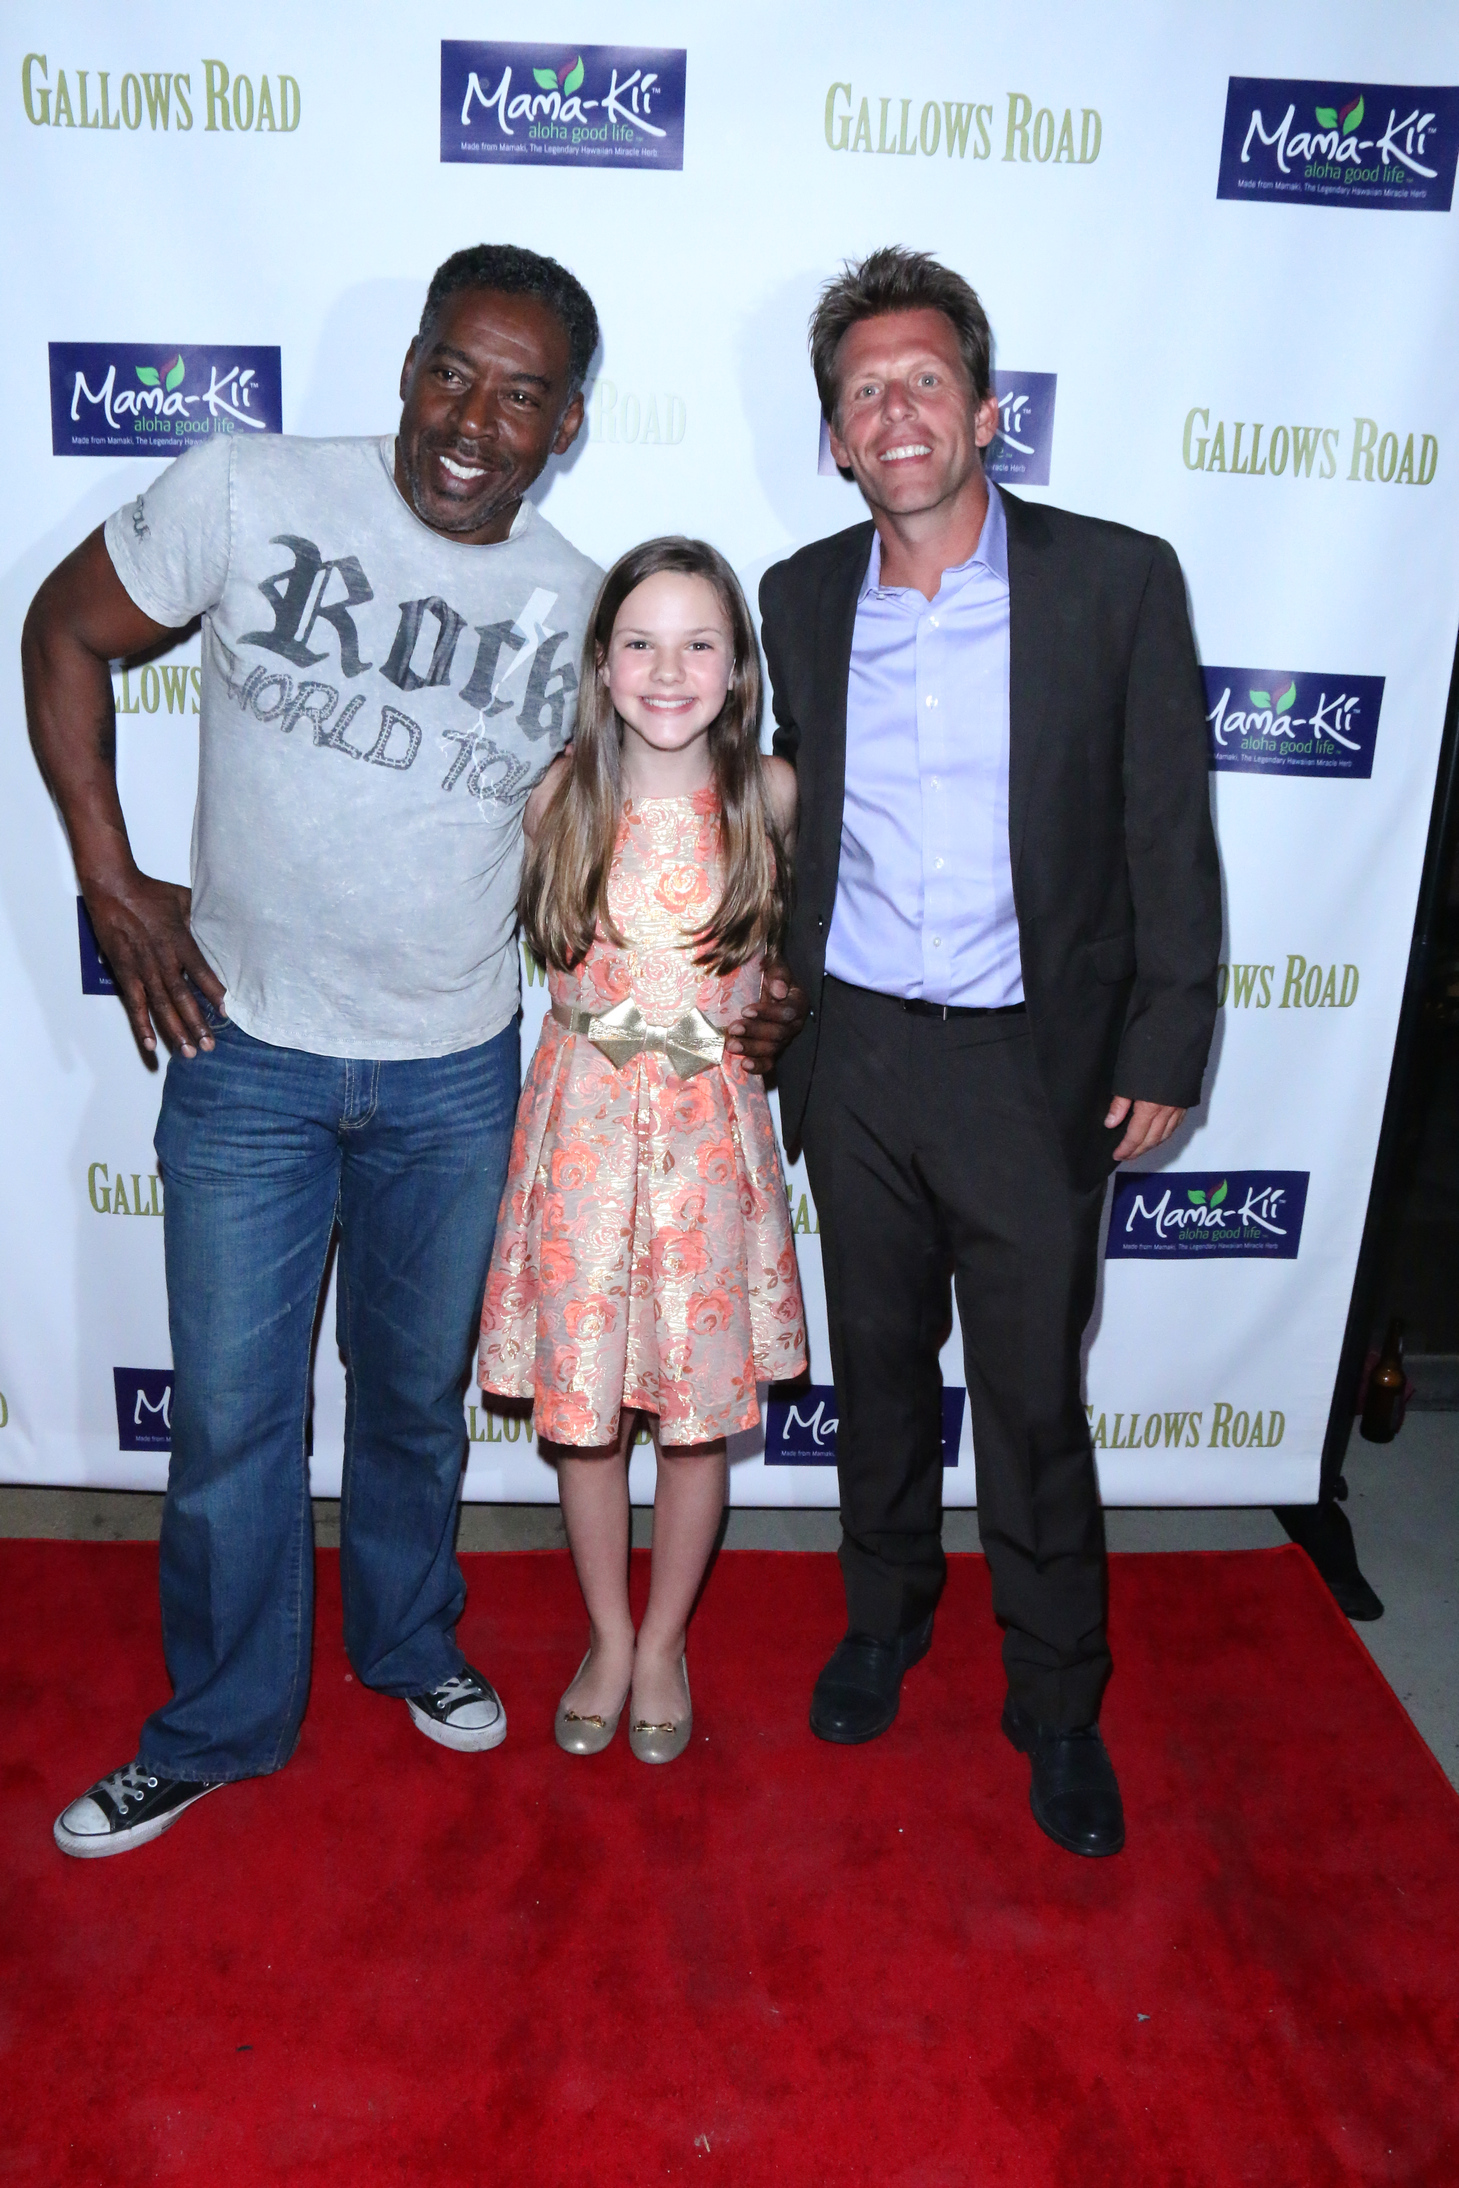 Ernie Hudson and director Bill McAdams Jr on red carpet in LA for Gallows Road